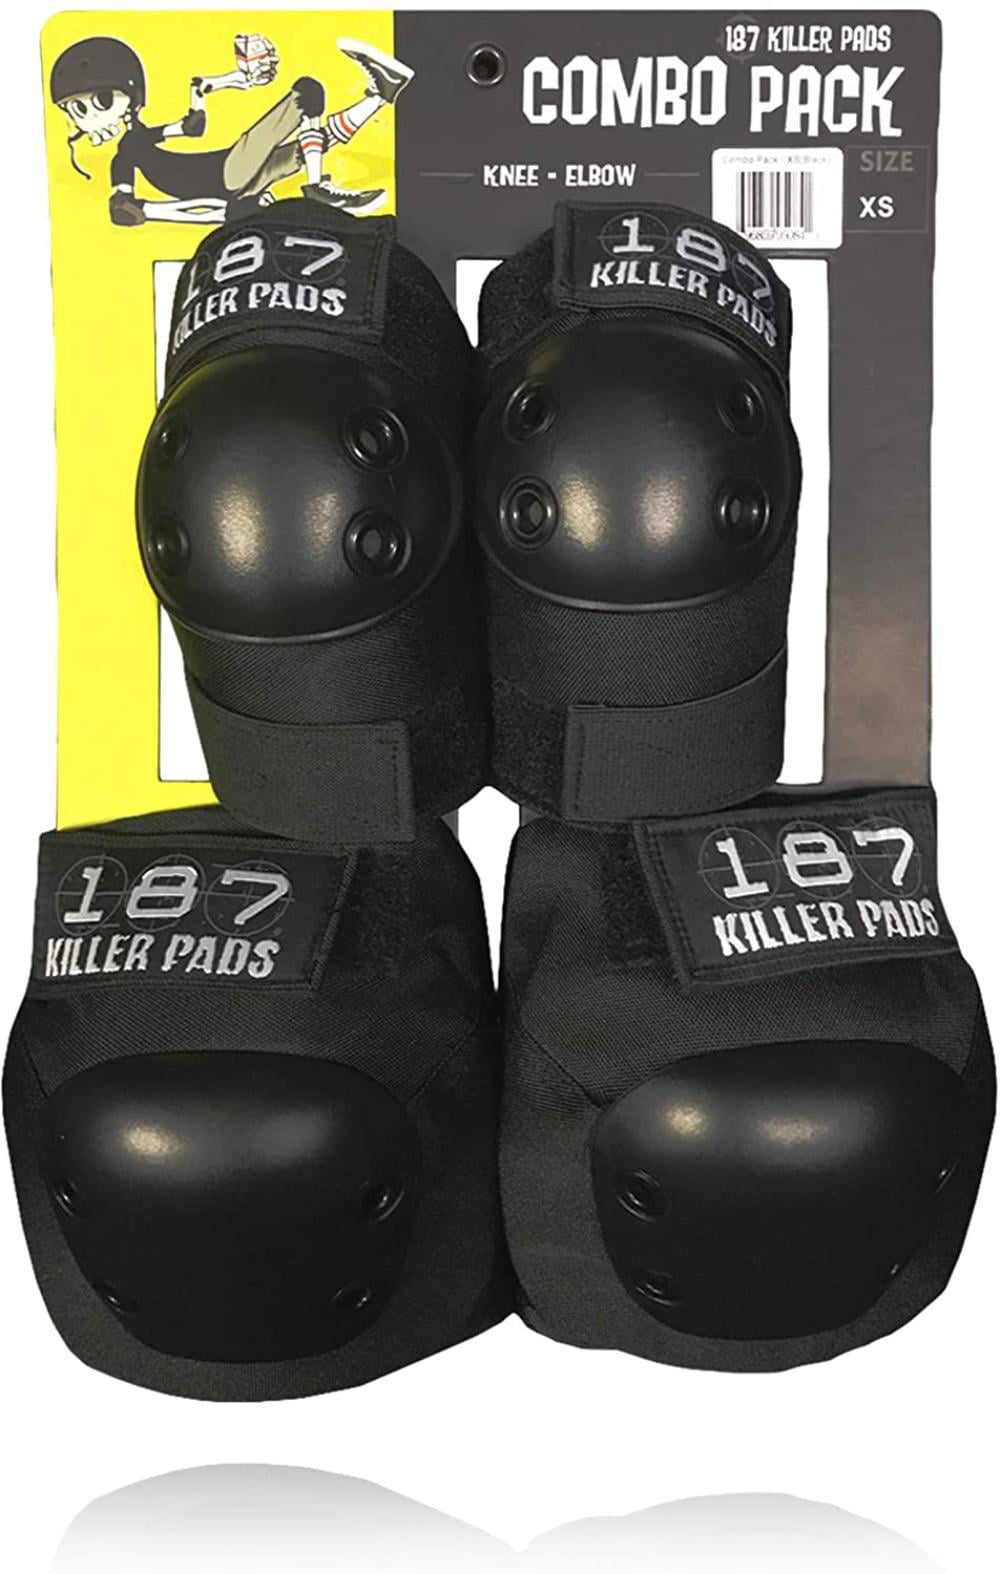 187 Killer Pads Knee Pads, Elbow Pads Combo Pack, Black, X- Small 